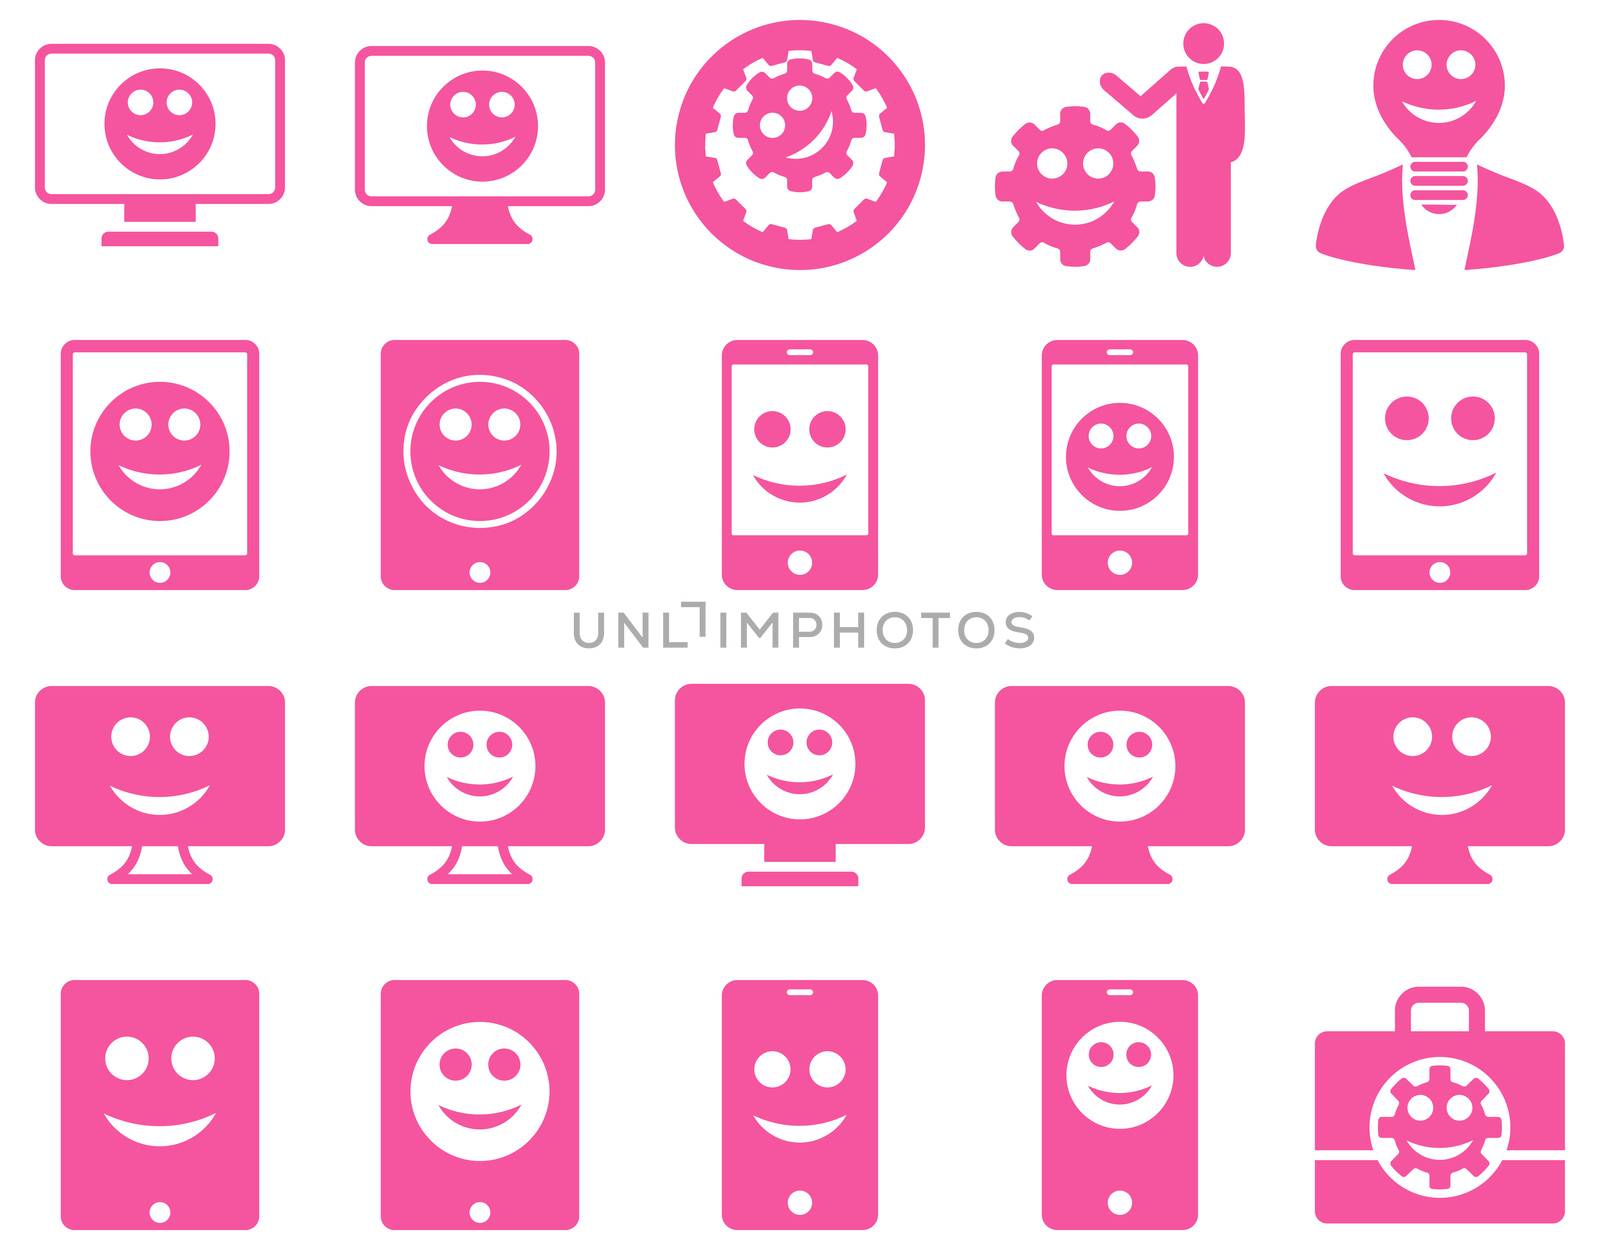 Tools, options, smiles, displays, devices icons. Glyph set style is flat images, pink symbols, isolated on a white background.